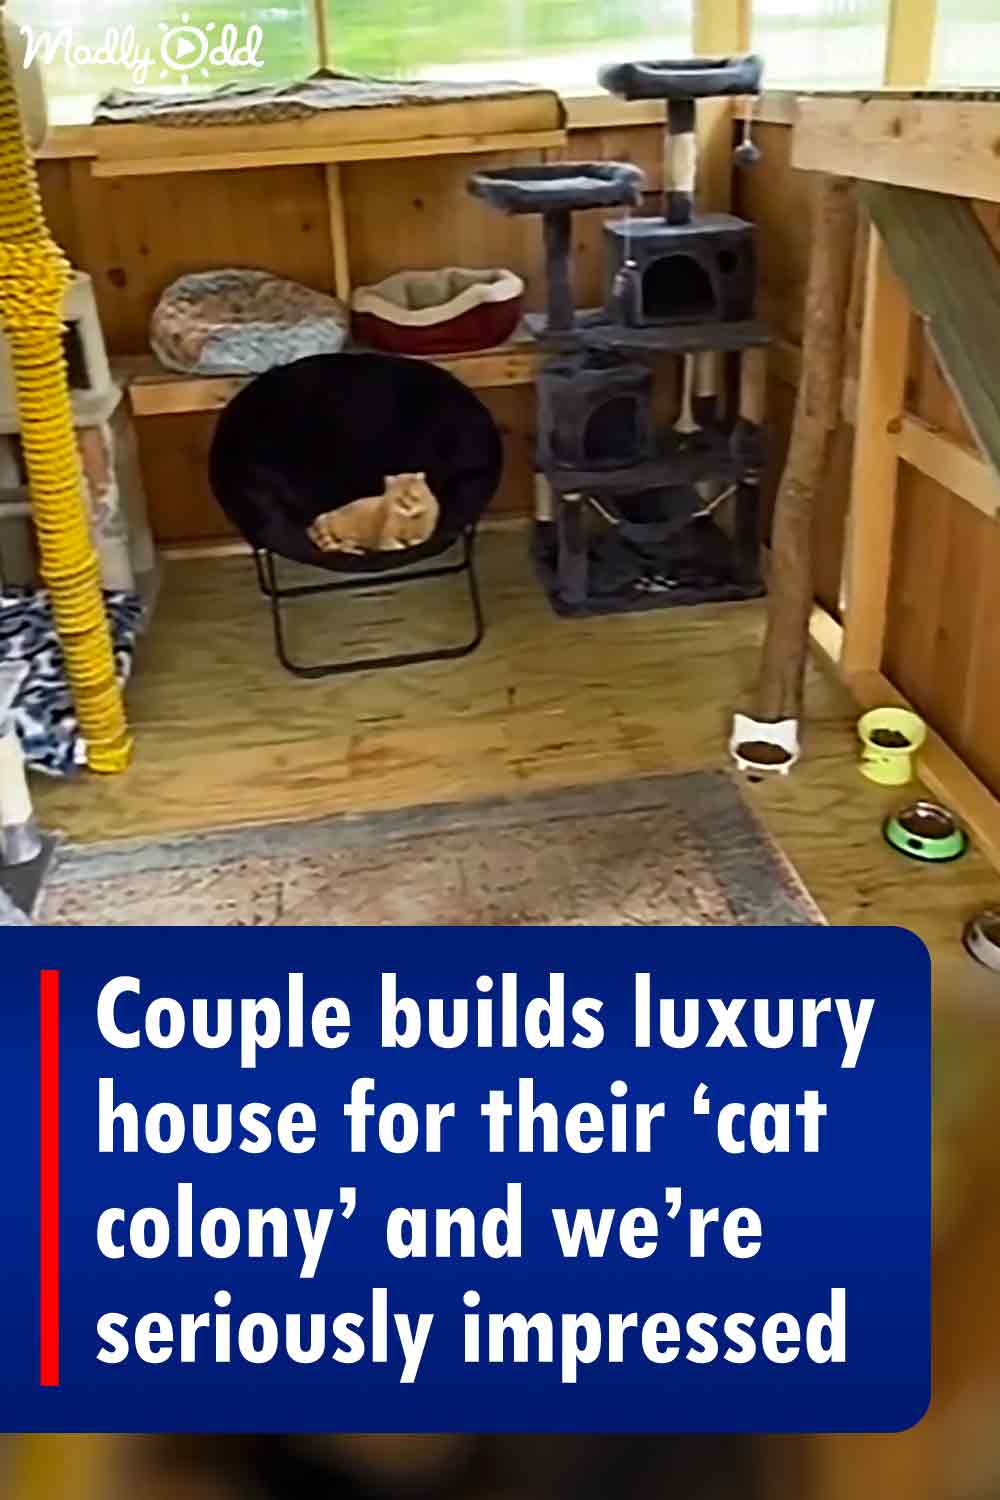 Couple builds luxury house for their ‘cat colony’ and we’re seriously impressed